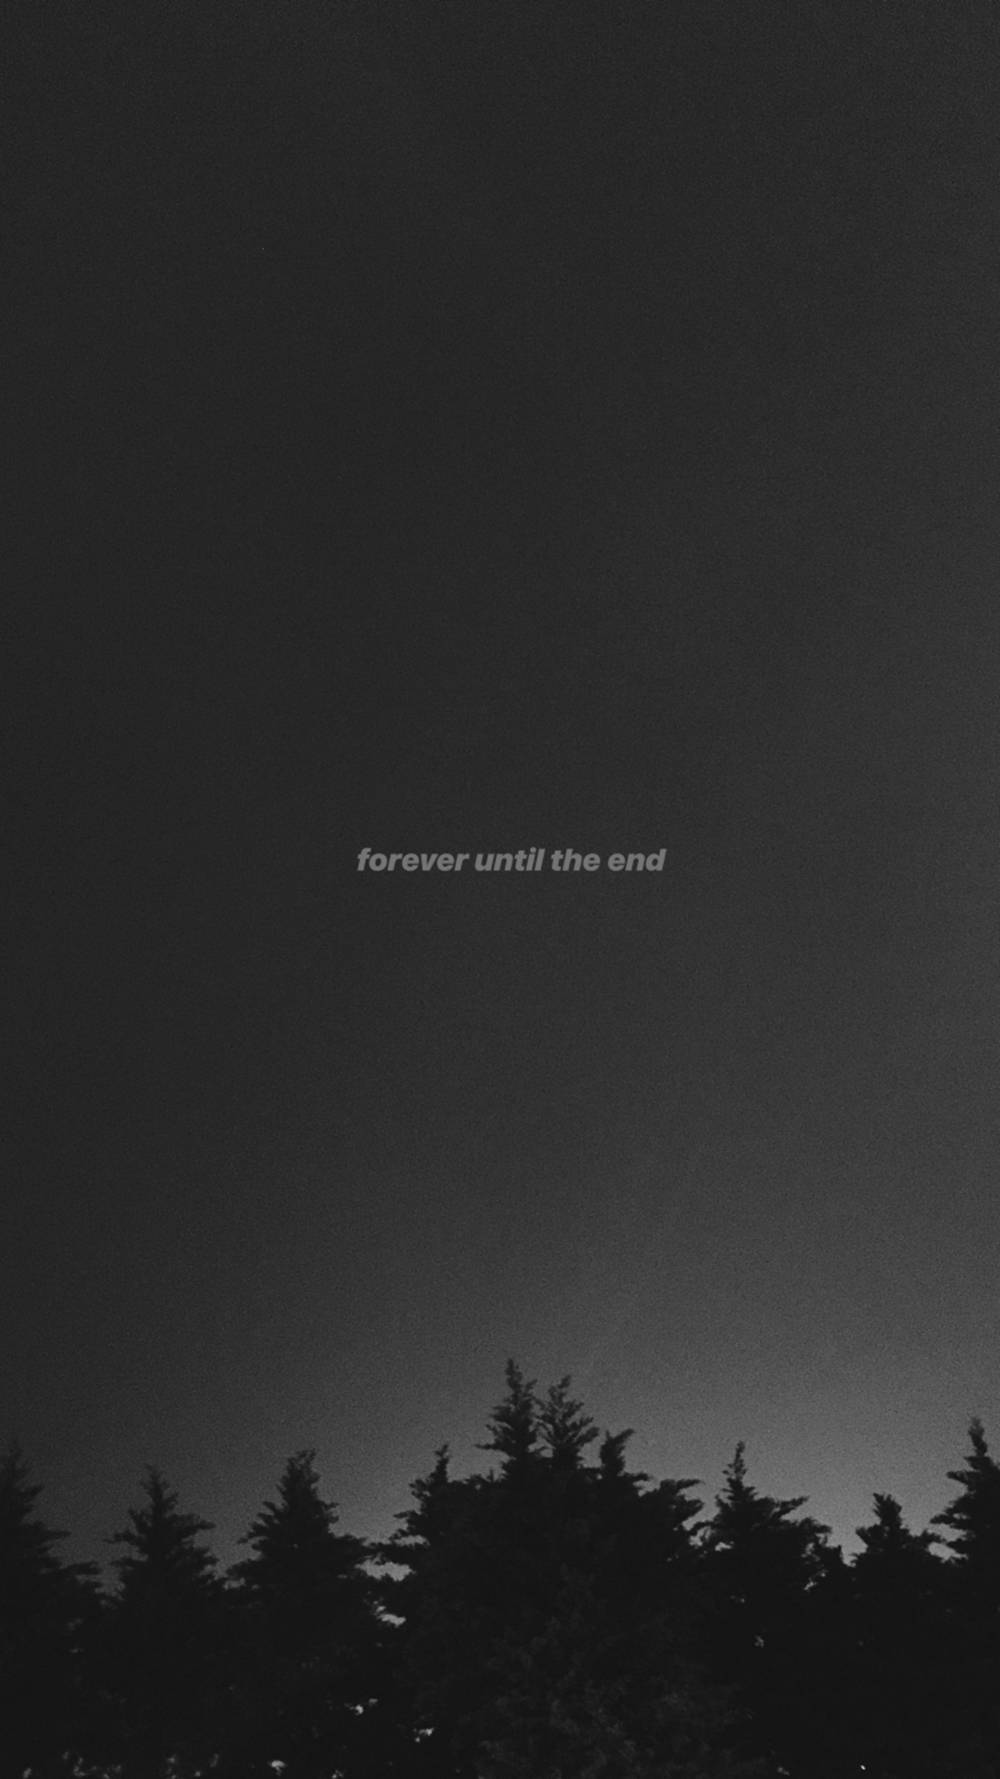 Download Forever Until The End Aesthetic Black Quotes Wallpaper | Wallpapers .com